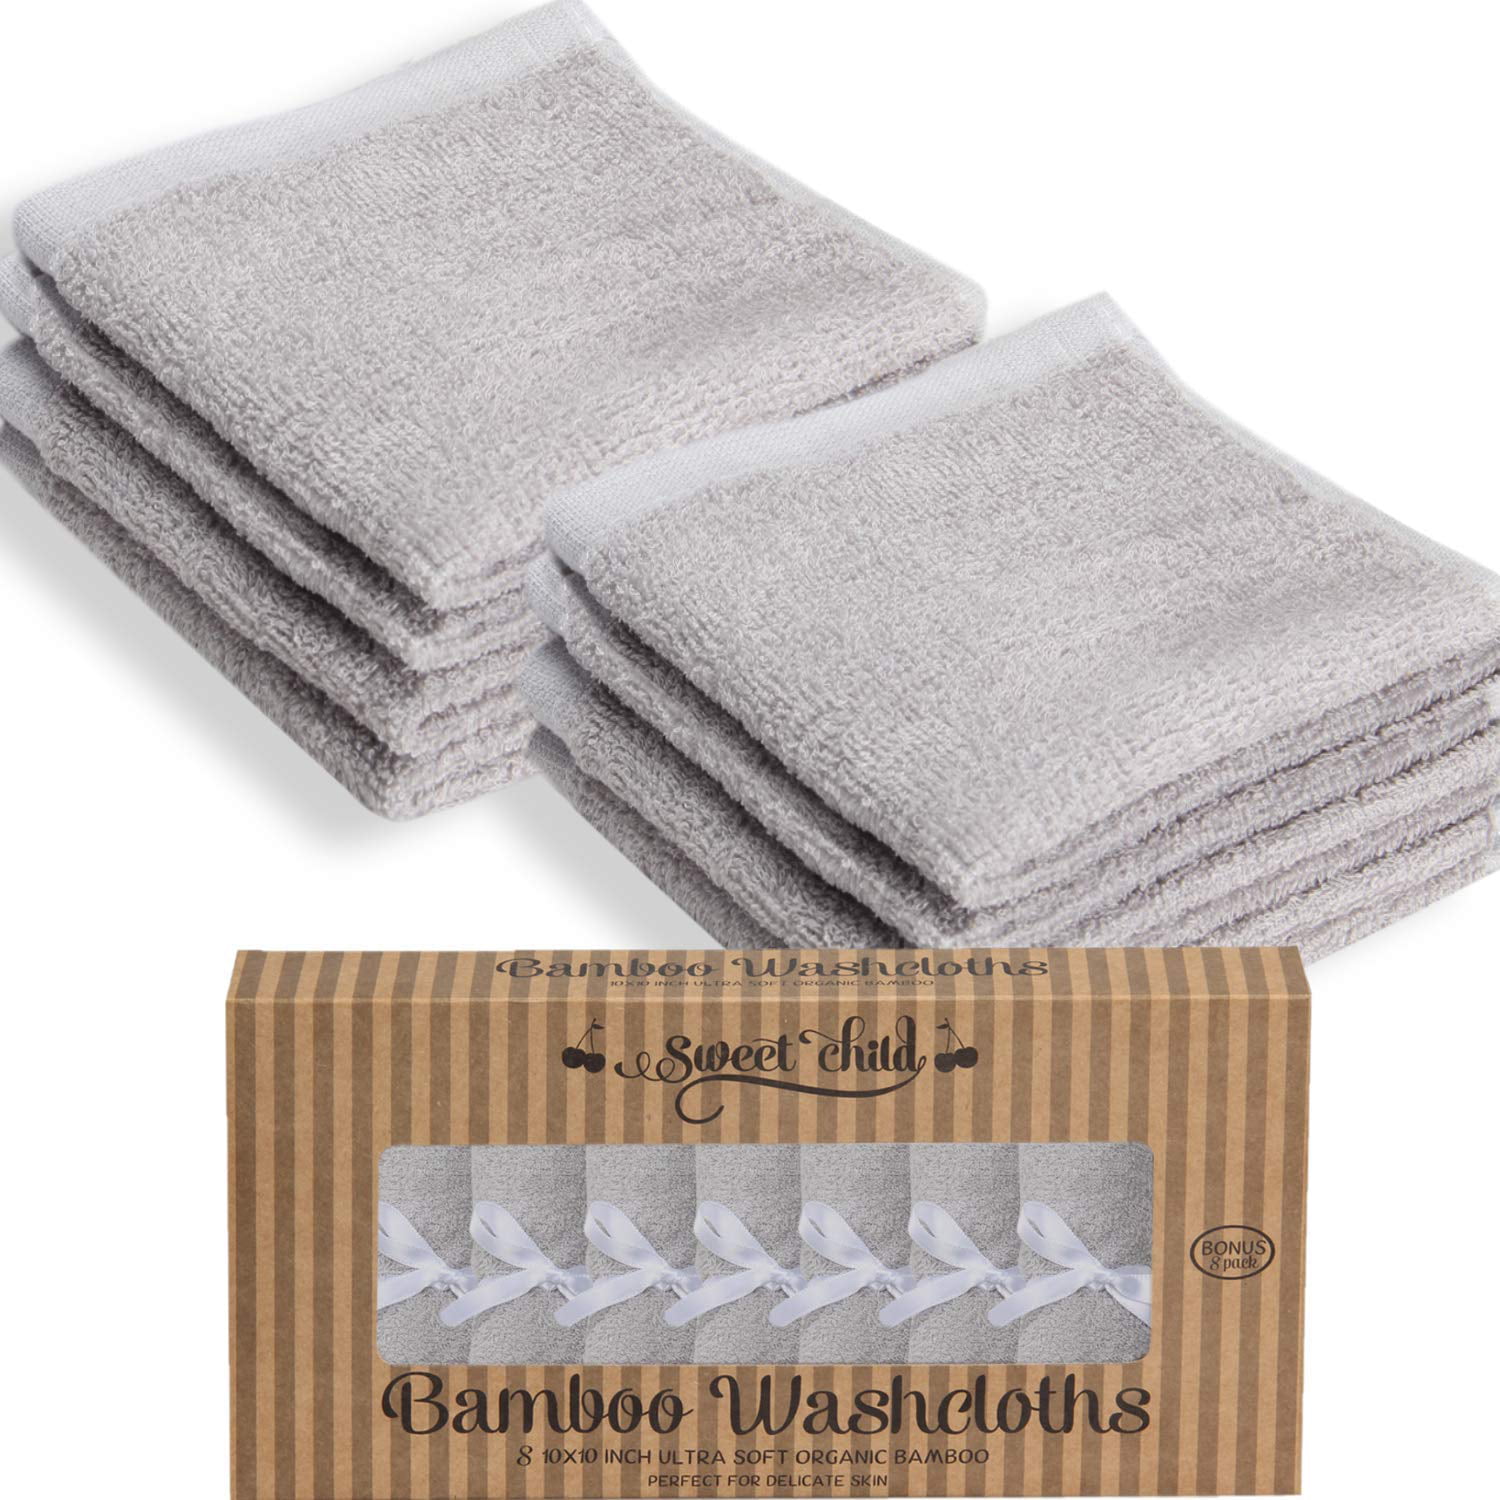 Specialist Recommended 5 Pack 10 X 10 Bubbawarez Baby Washcloths Soft Organic Dual Sided Bamboo Mini Towels Great Registry Gift Versatile Perfect for Yours & Babies Delicate Skin Gentle 